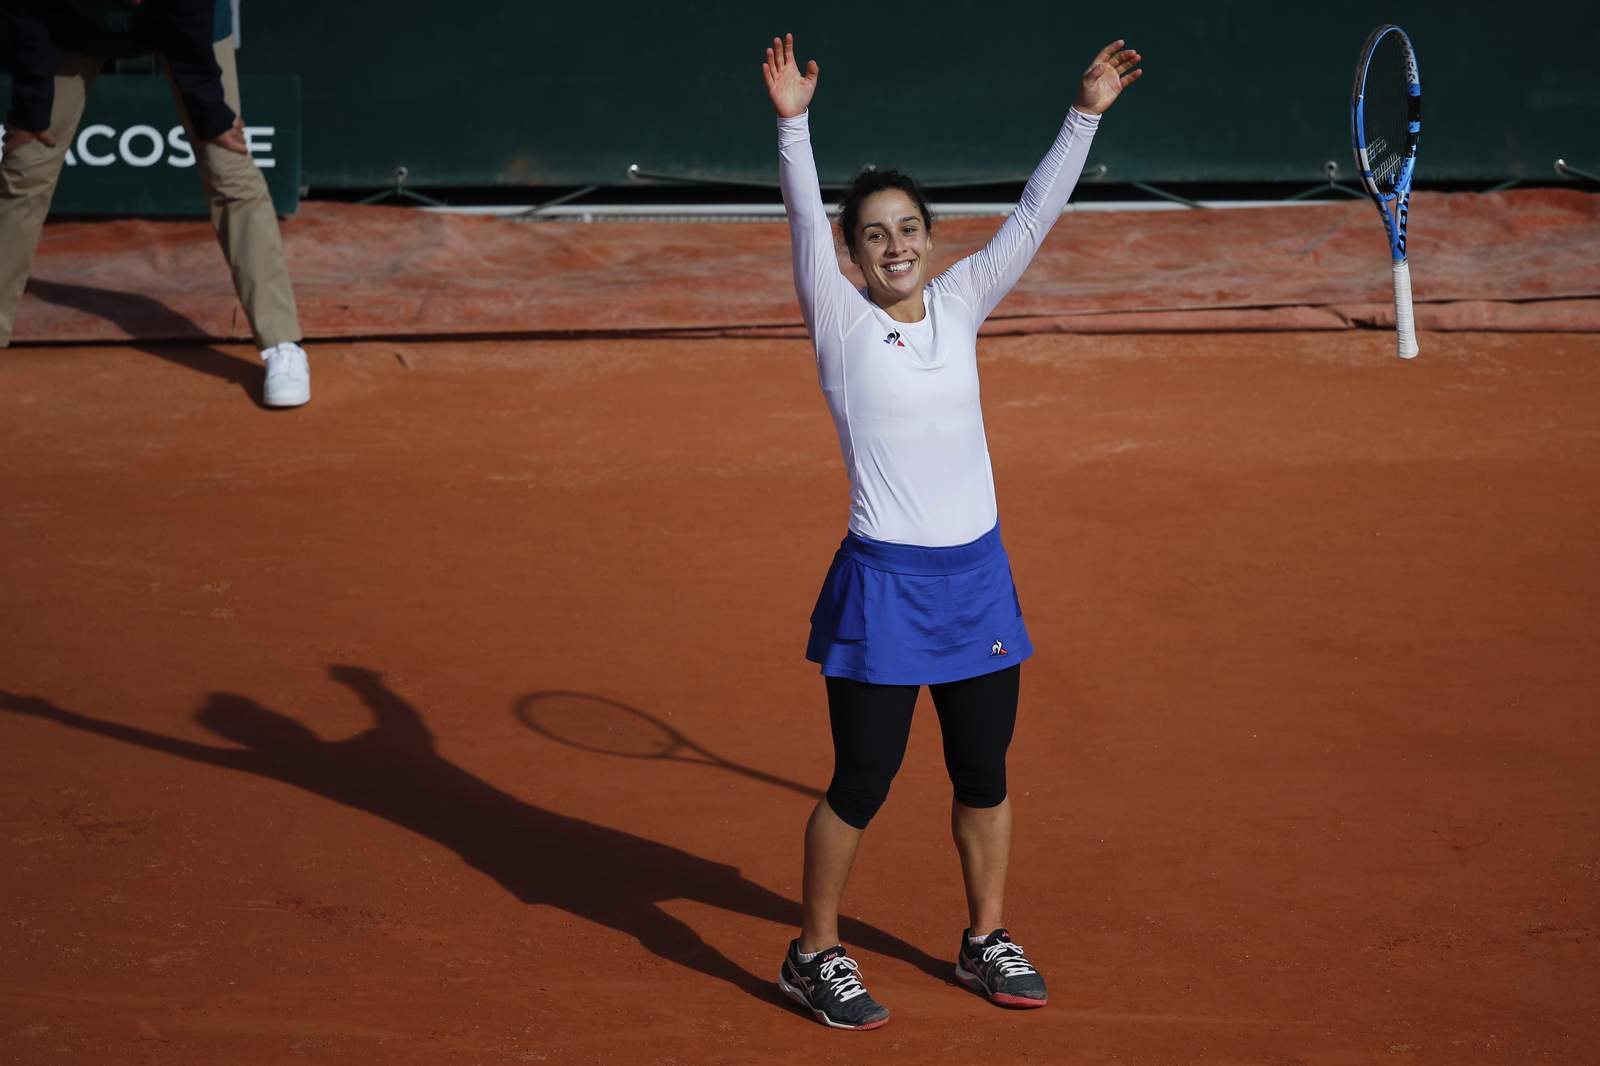 Winds of change blow on day of upsets at French Open